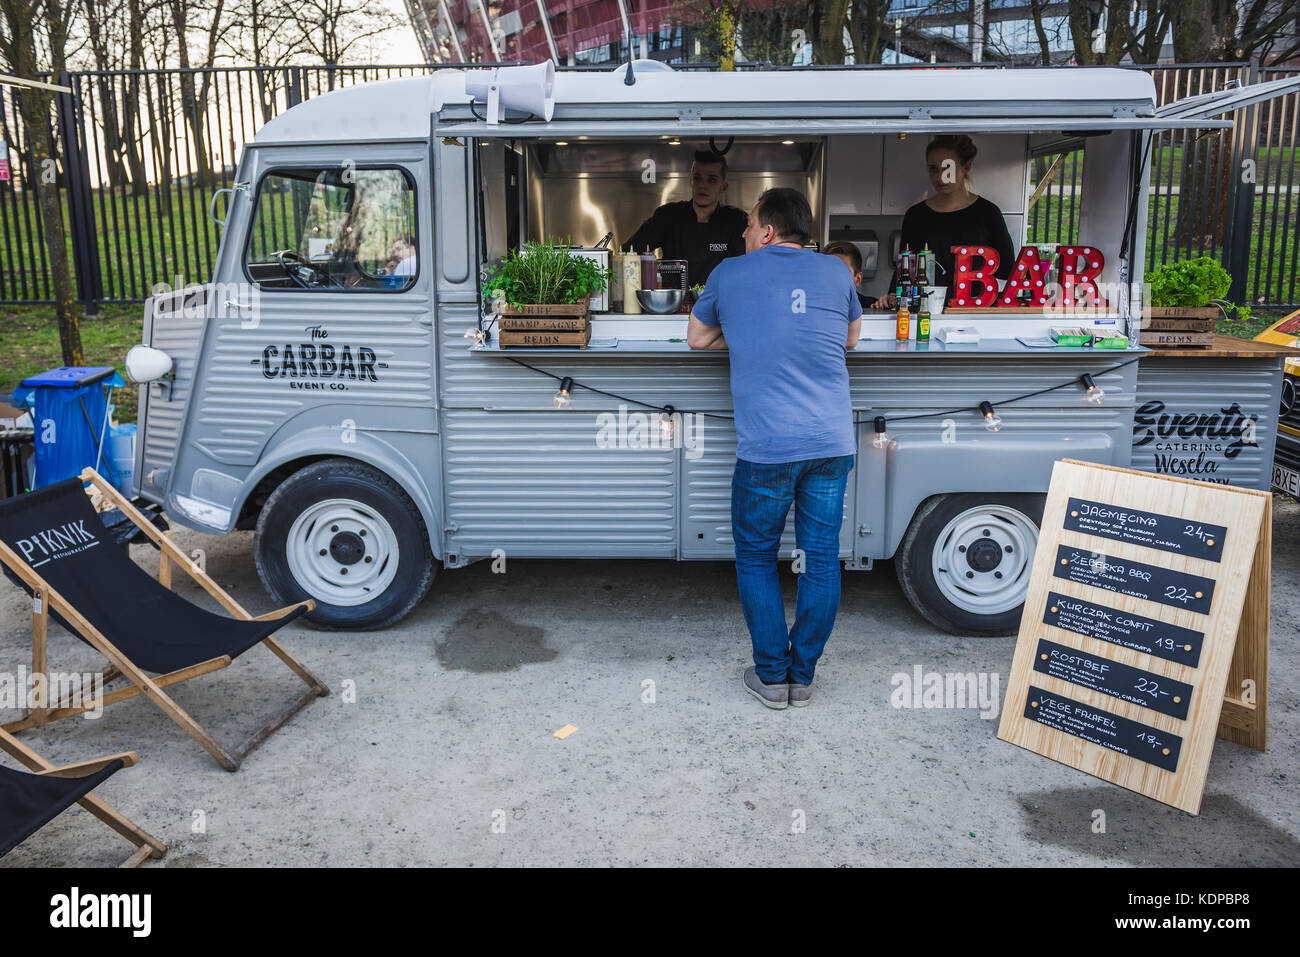 Vintage food truck during Food Truck festival in Warsaw, Poland in 2017  Stock Photo - Alamy